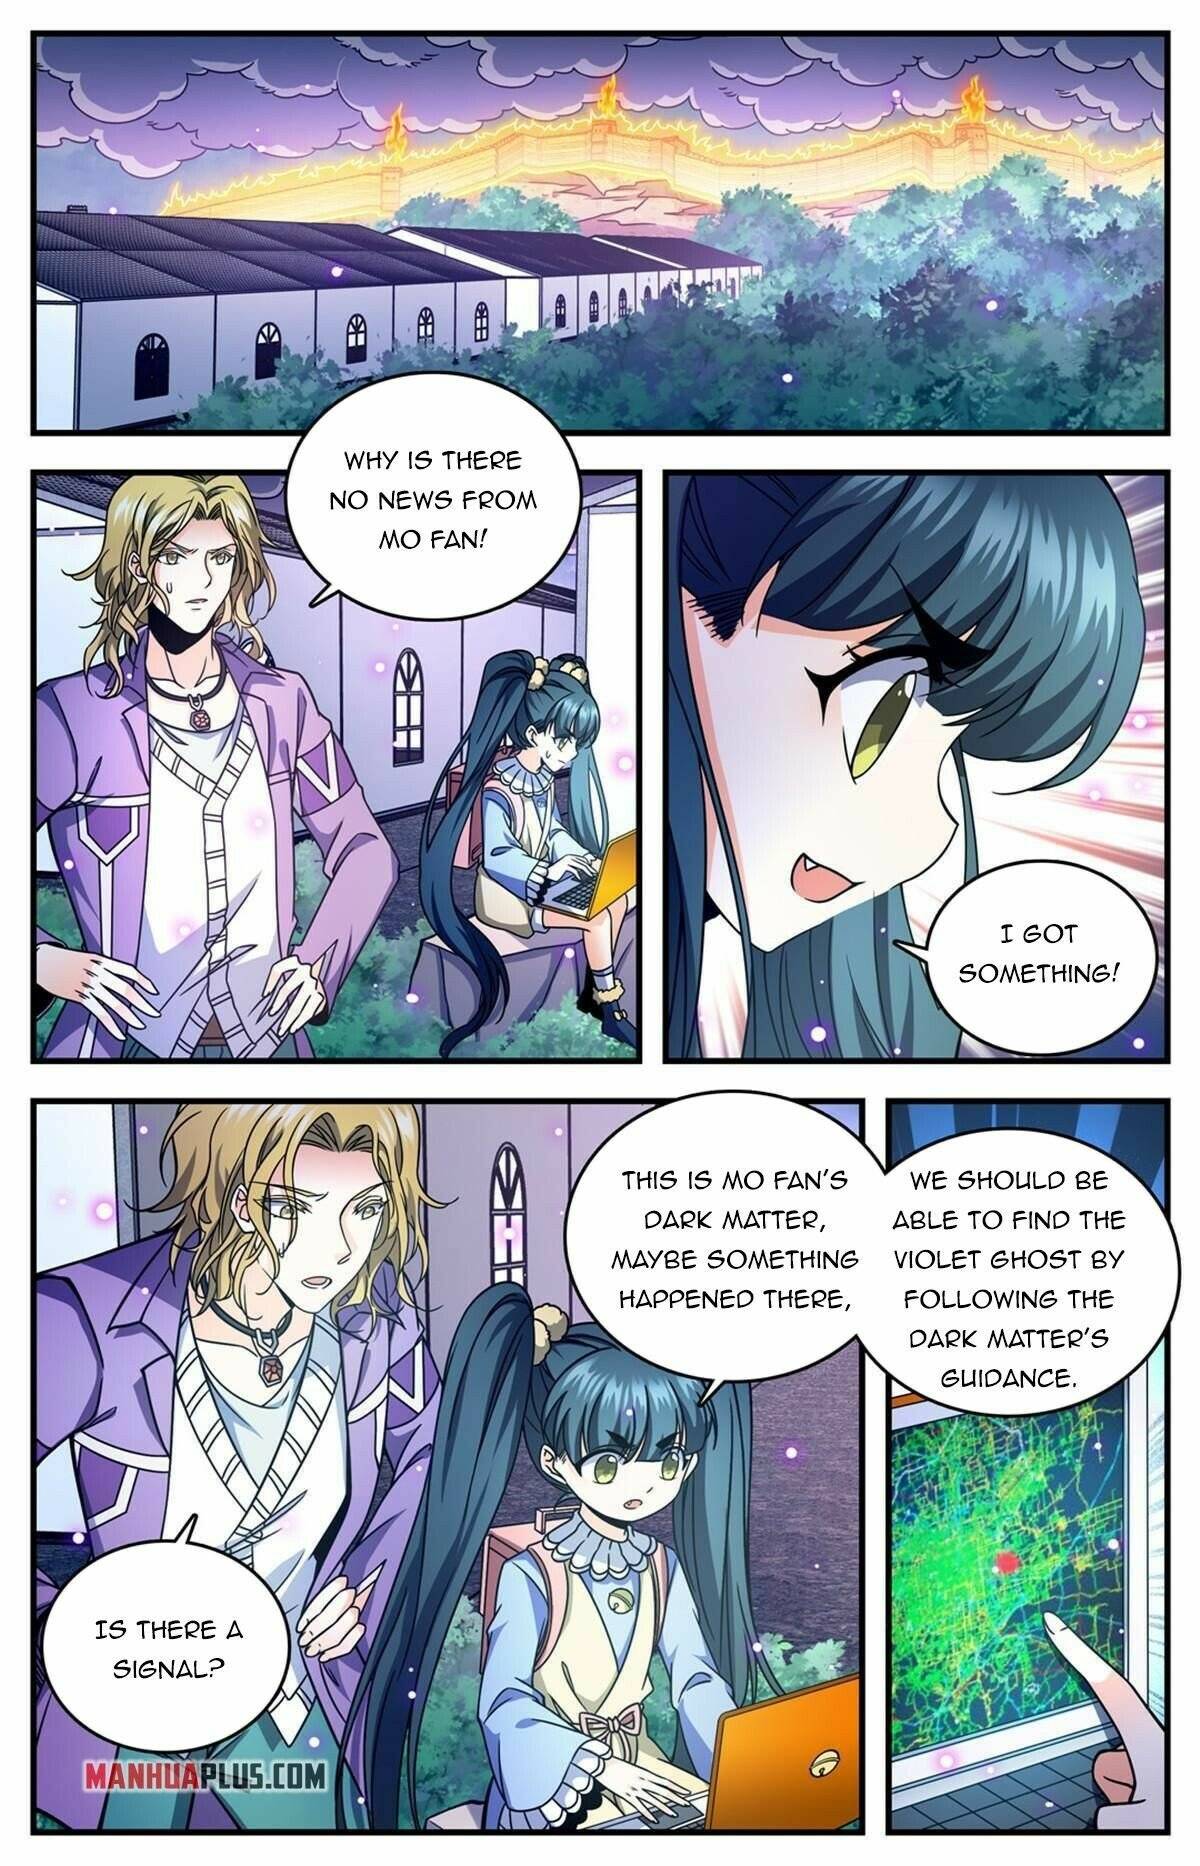 Versatile Mage chapter 860 page 3